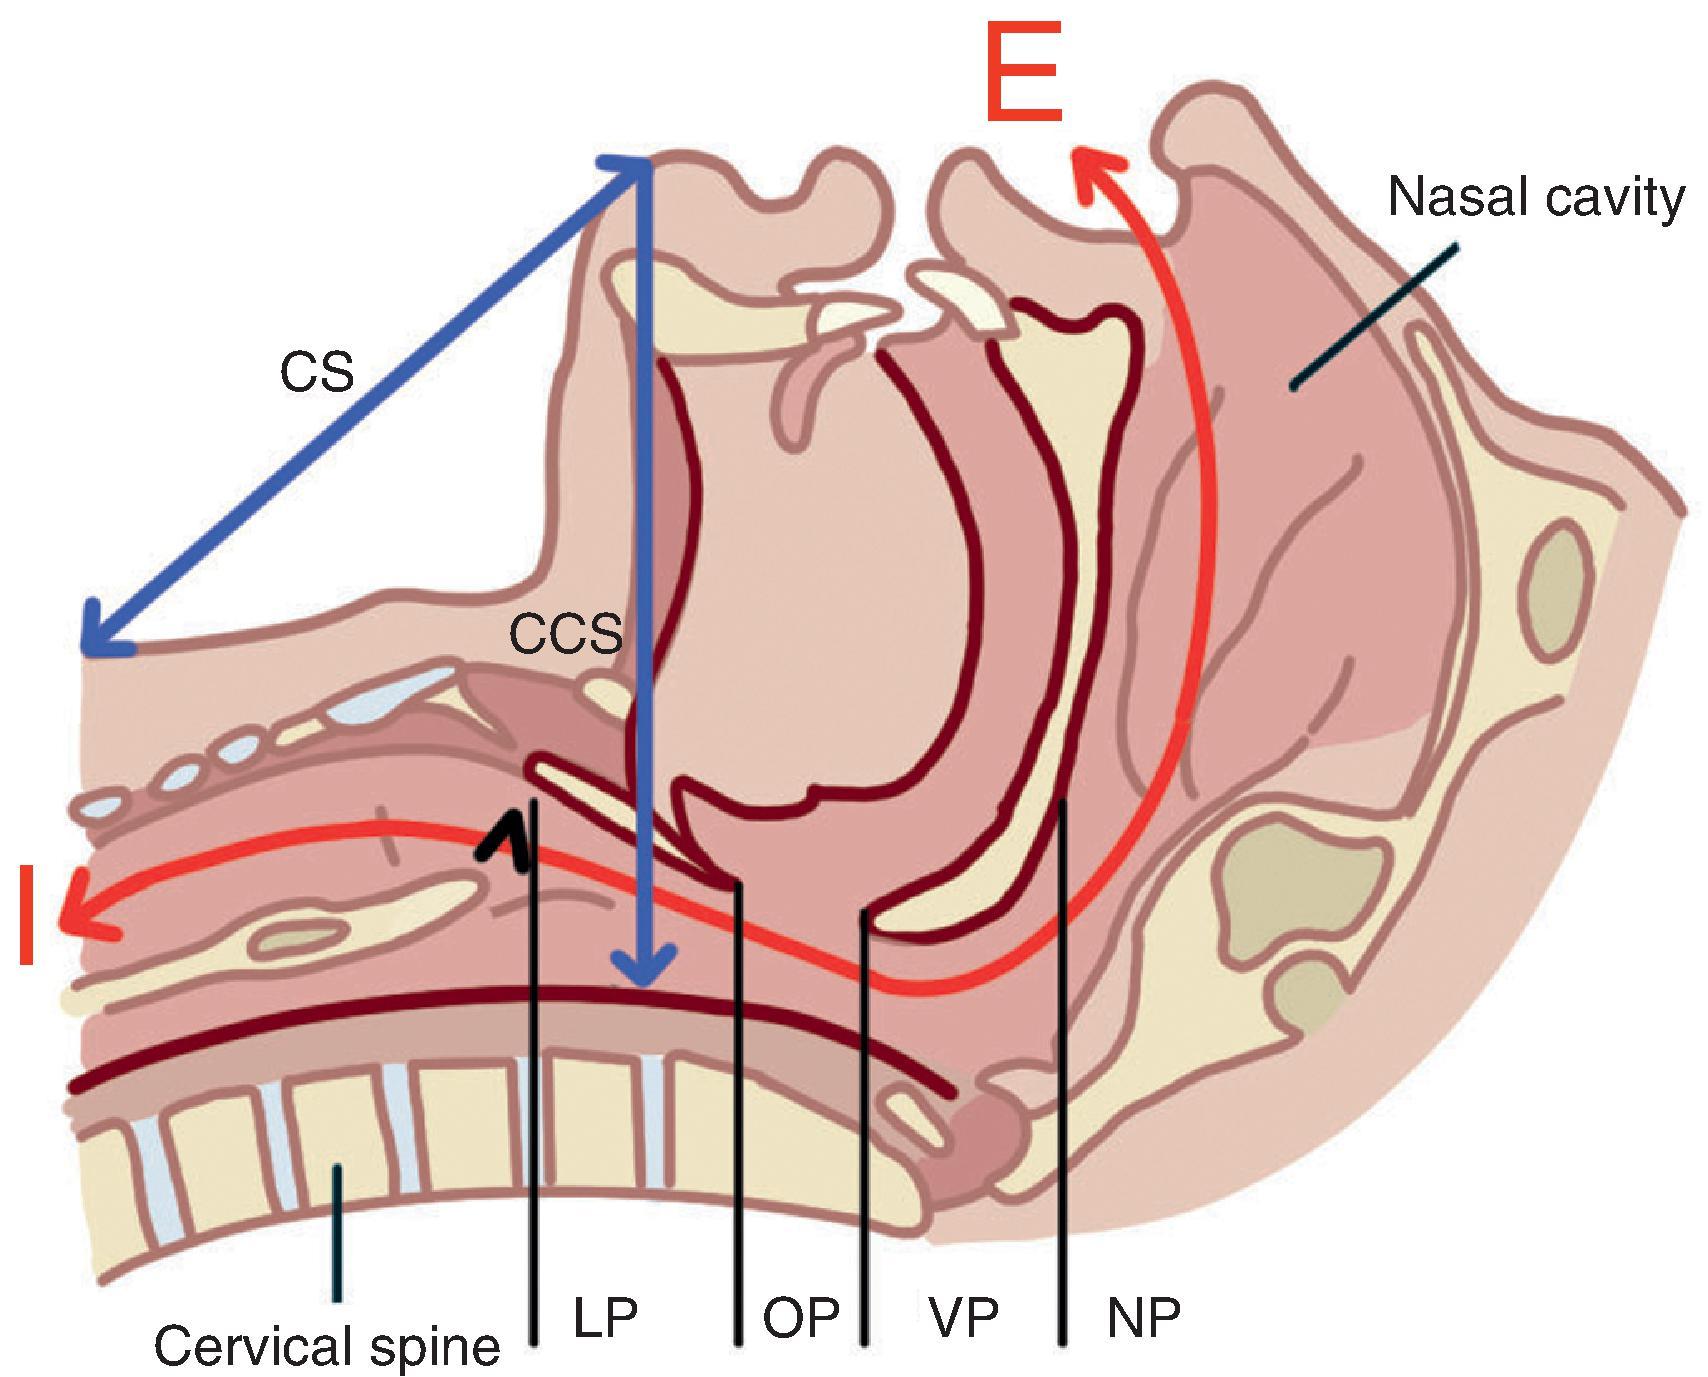 Fig. 18.1, The upper airway pharyngeal compartments: the nasopharynx (NP) , velopharynx (VP) , oropharynx (OP) , and laryngopharynx (LP) . The anatomic sites of UA soft tissue collapse in an unconscious patient are the soft palate, the most important being the tongue and epiglottis. The generic markers of chin elevation (by head extension or mandibular advancement) are the increase of the chin–sternum (CS) and chin–cervical spine (CCS) distance. The nasal ventilation route (with the mouth closed)— red line —cumulates all the potential obstruction sites: nasal cavities, NP, VP, OP, LP, and the glottis in expiration (E) and inspiration (I) .